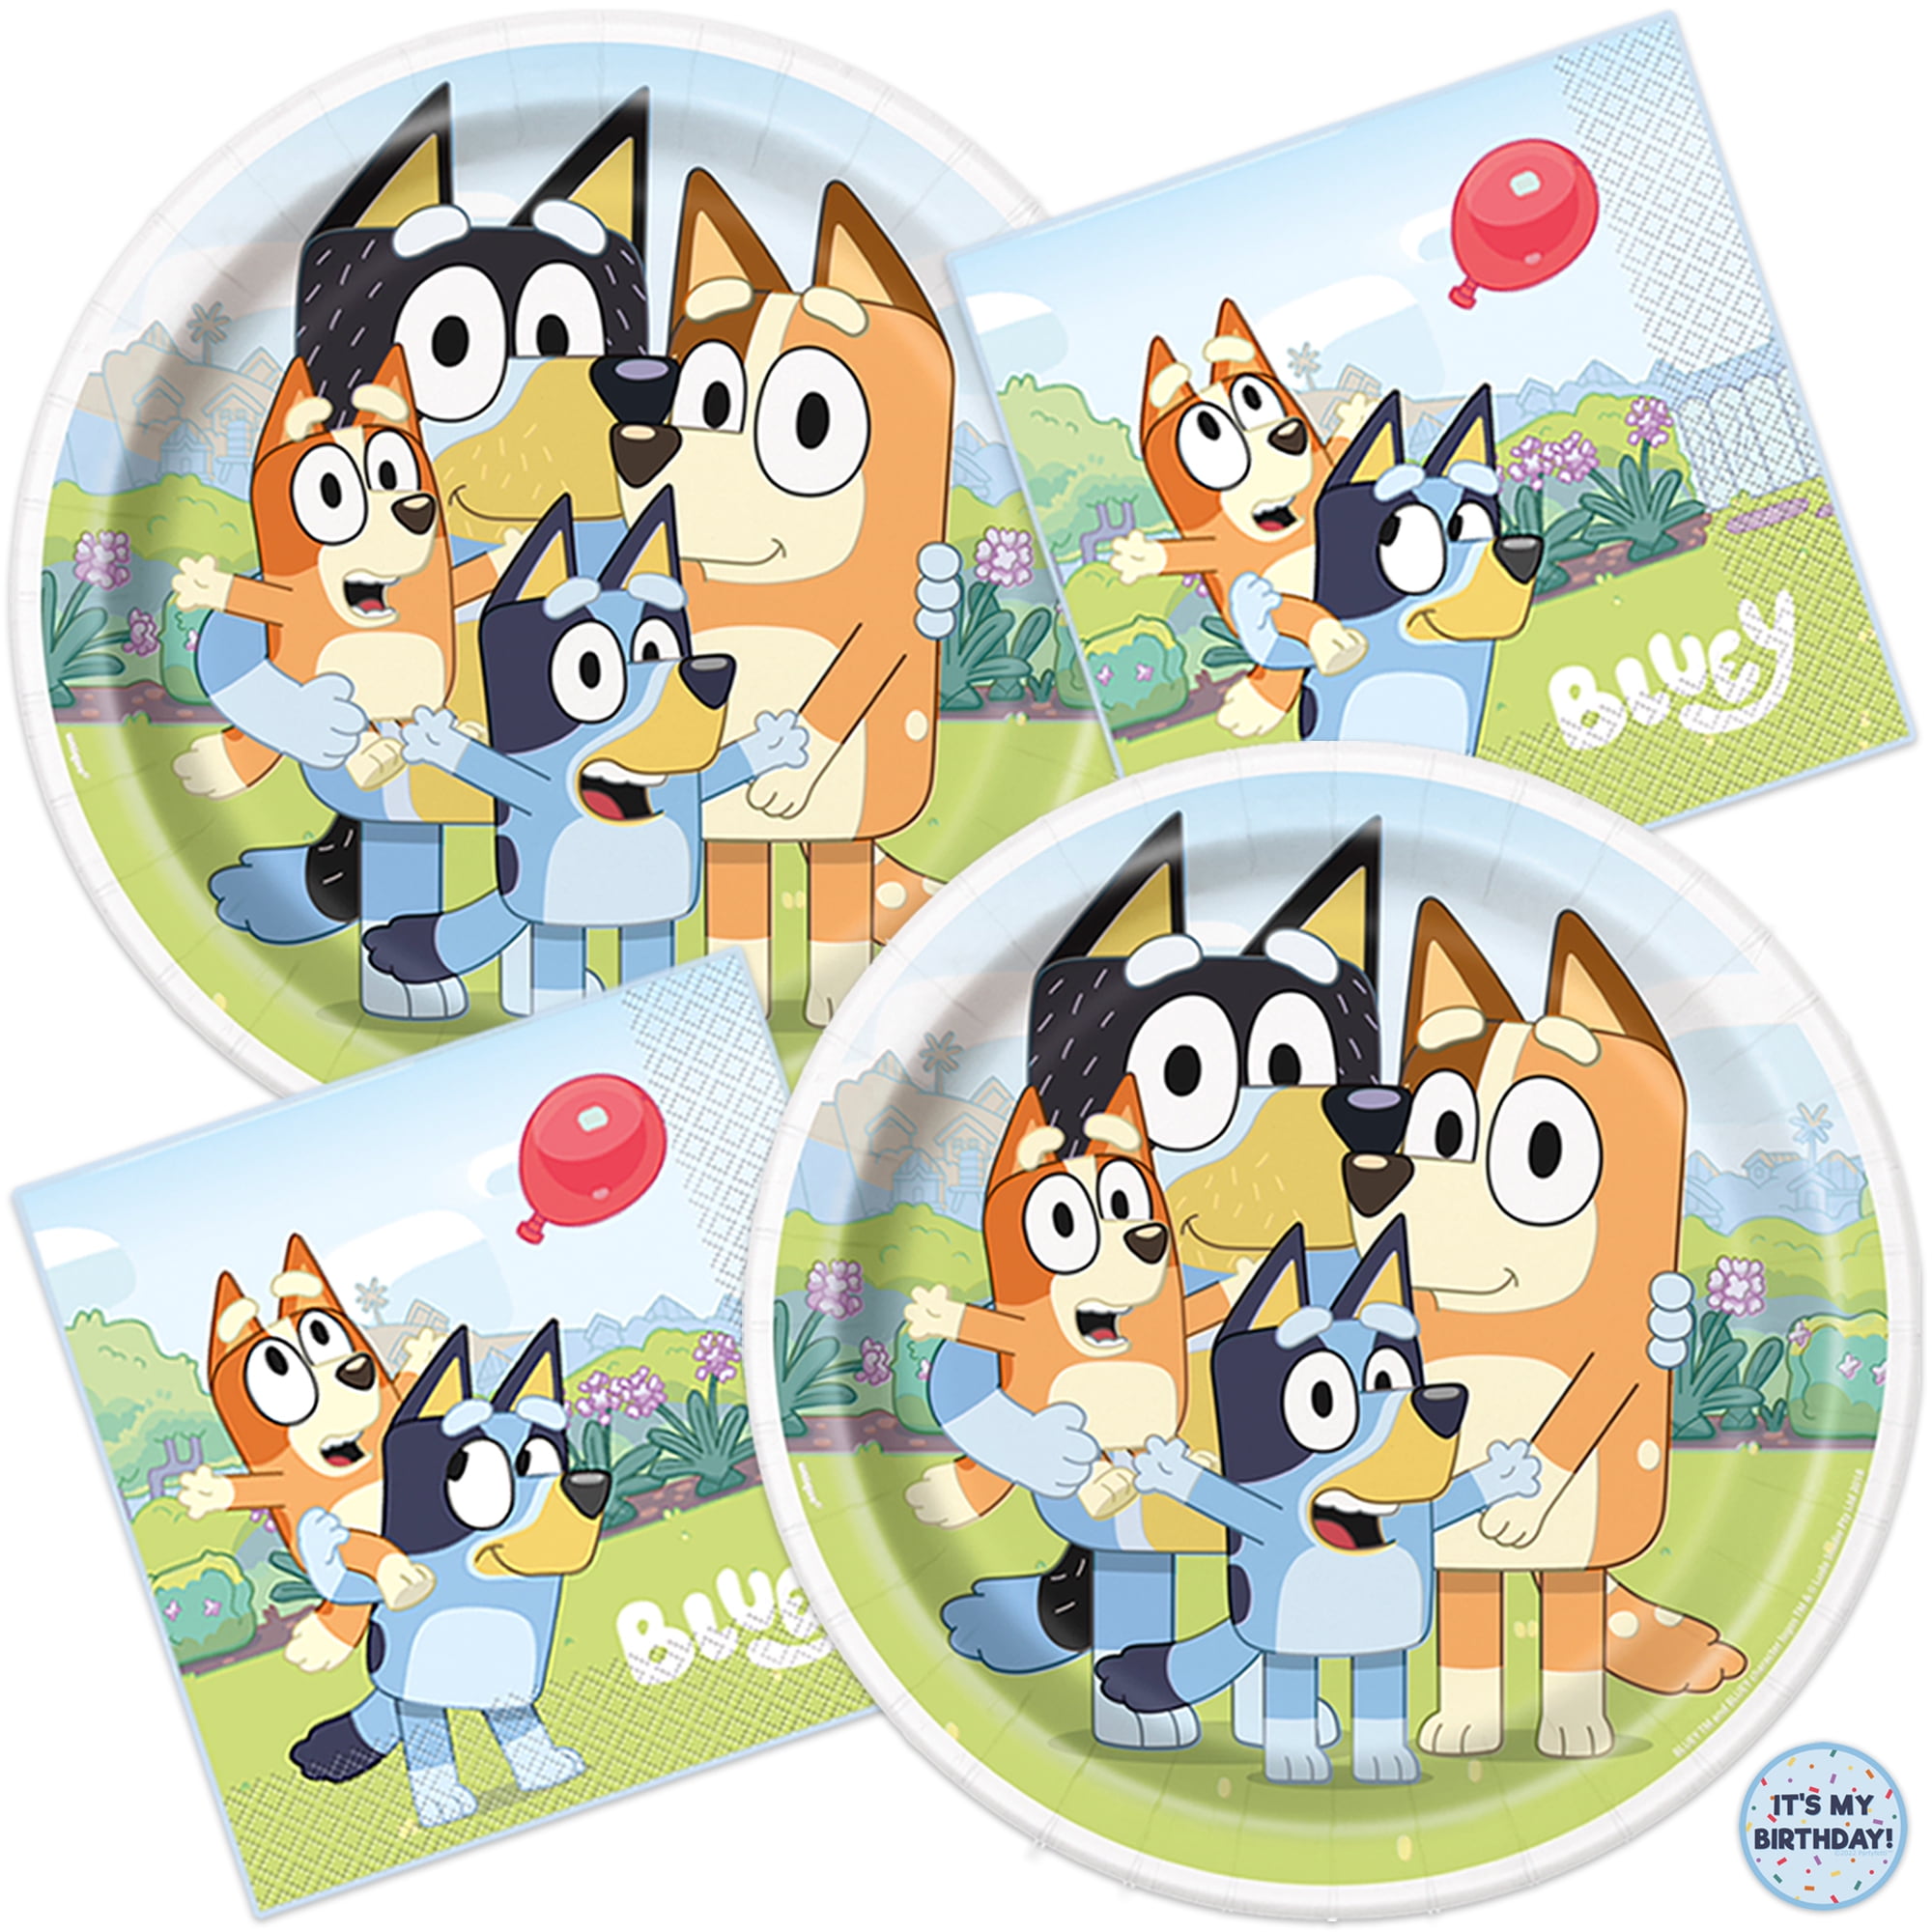 Bluey Birthday Decorations for 16 Guests | Bluey Birthday Party Supplies |  Large 9 Plates, Napkins, Sticker